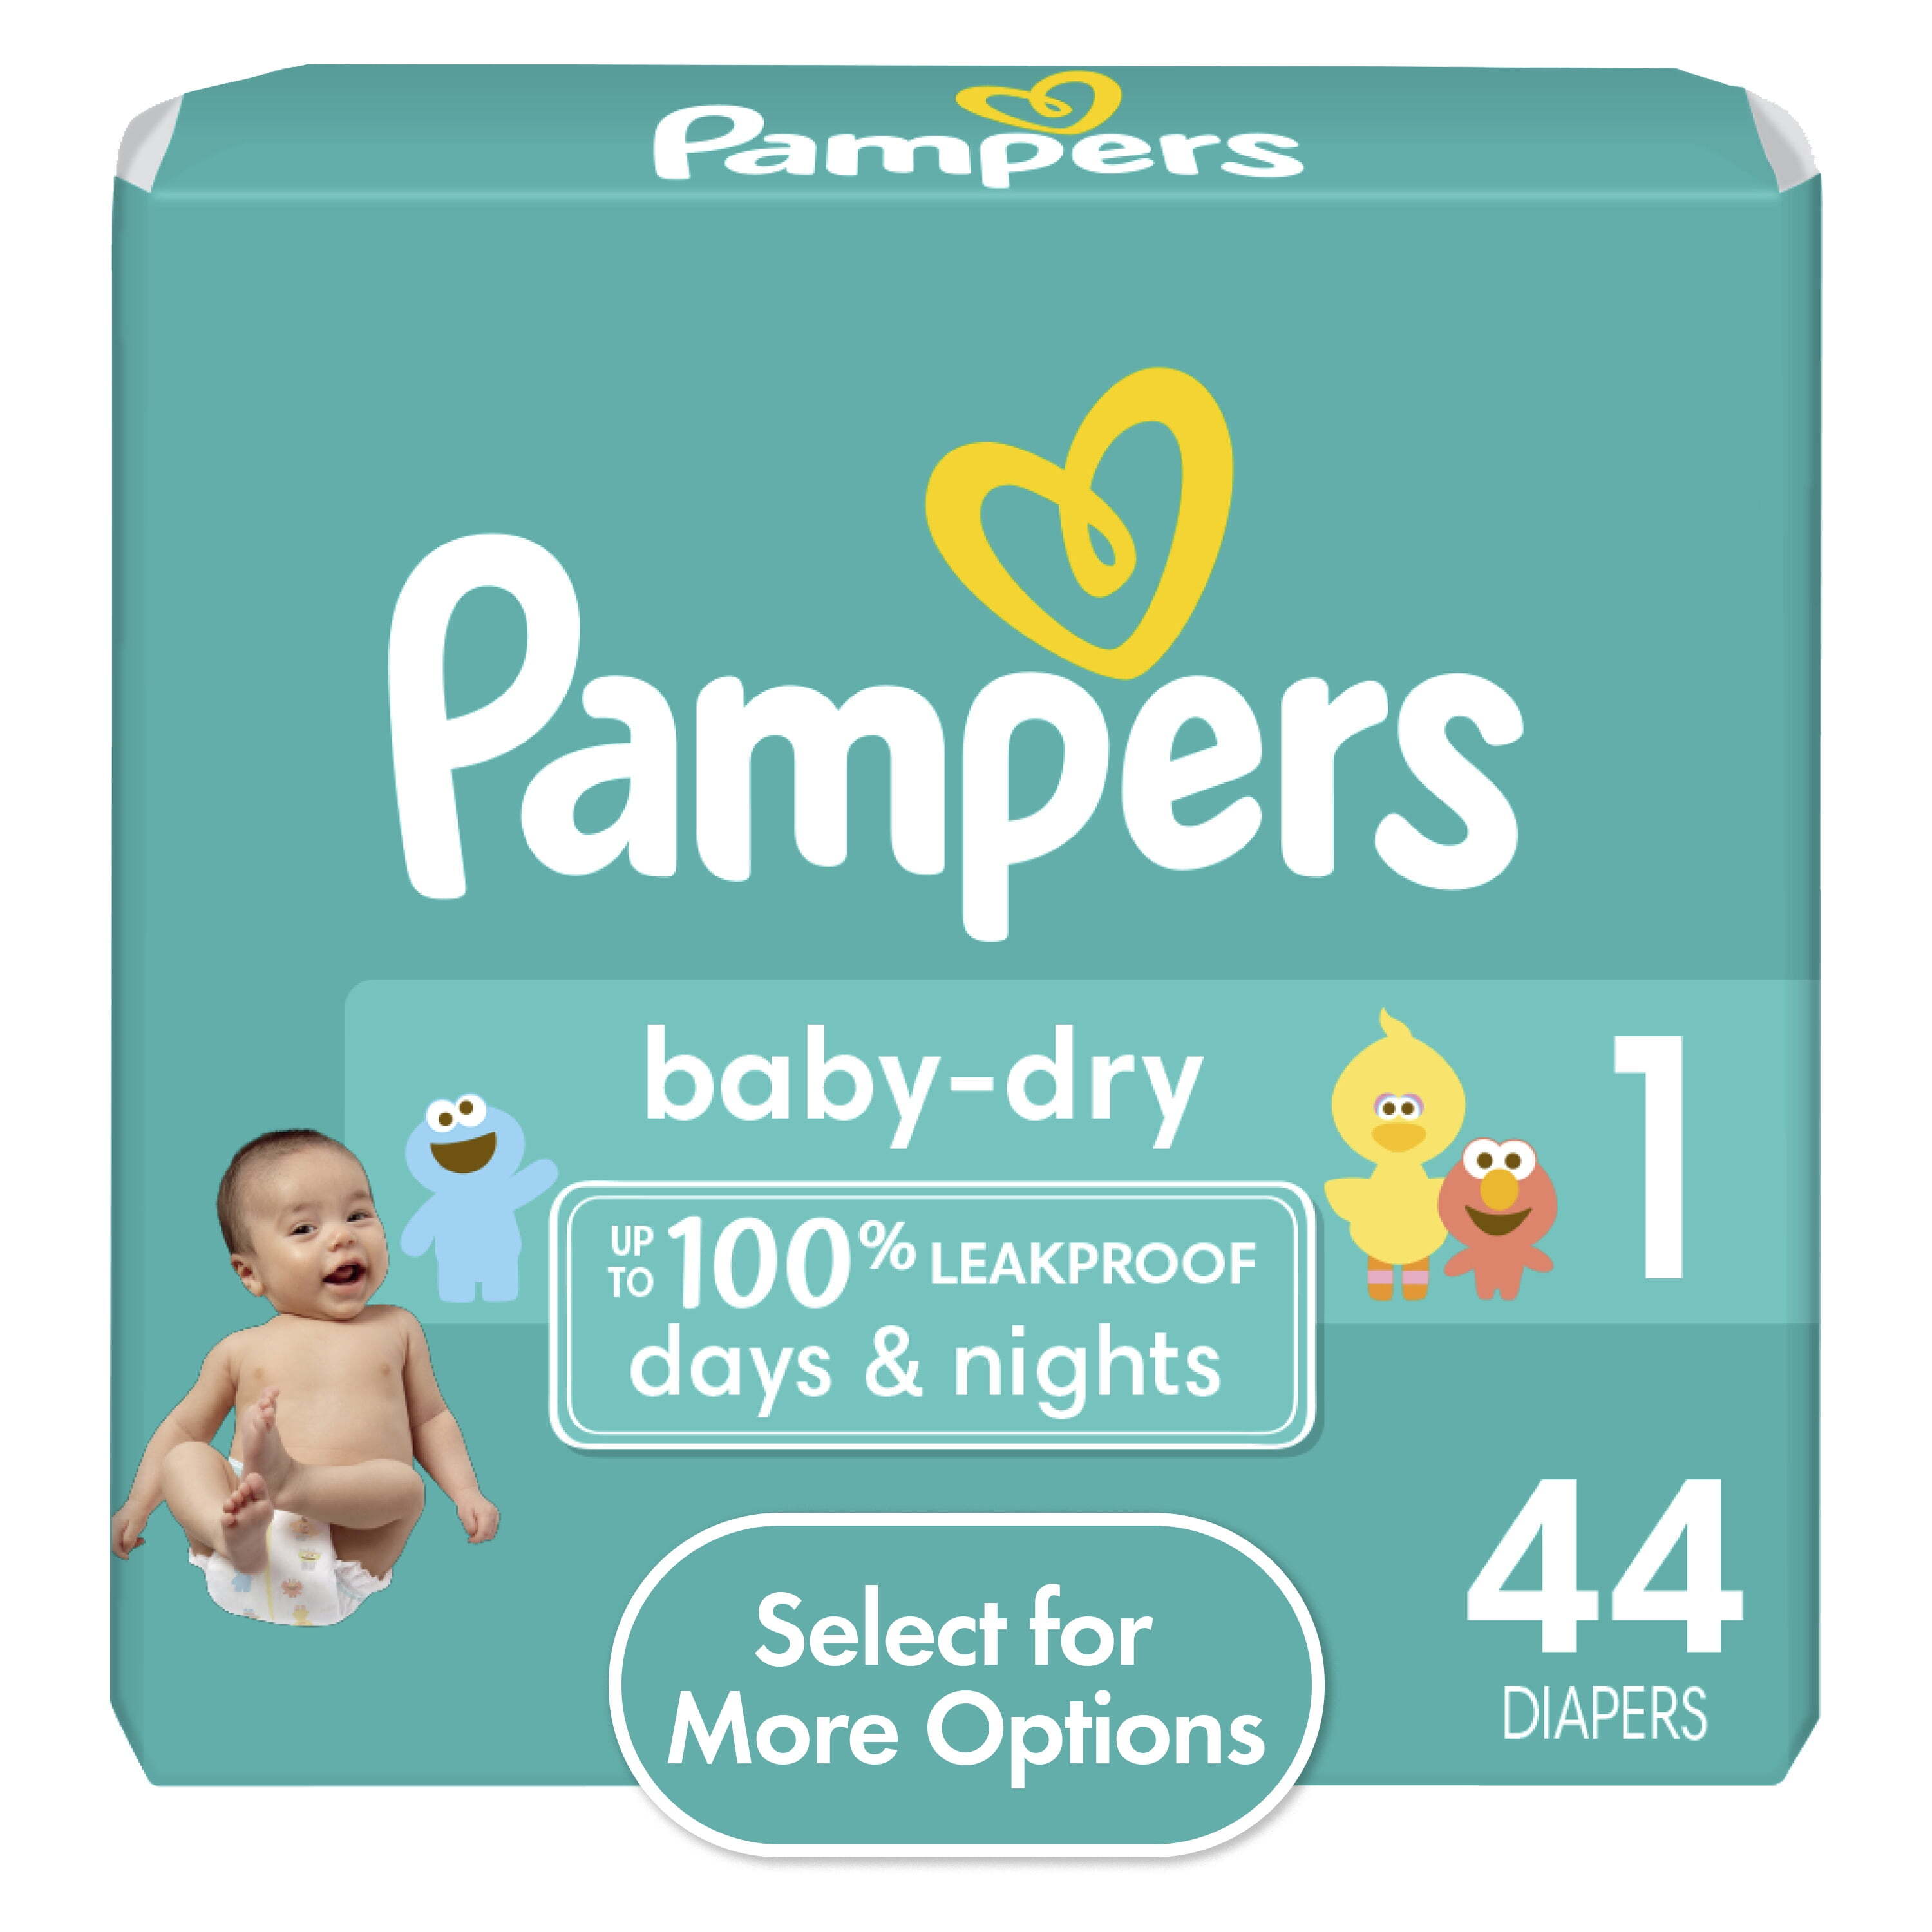 Pampers Baby Dry Diapers Size 1, 44 Count (Select for More Options) - image 1 of 13